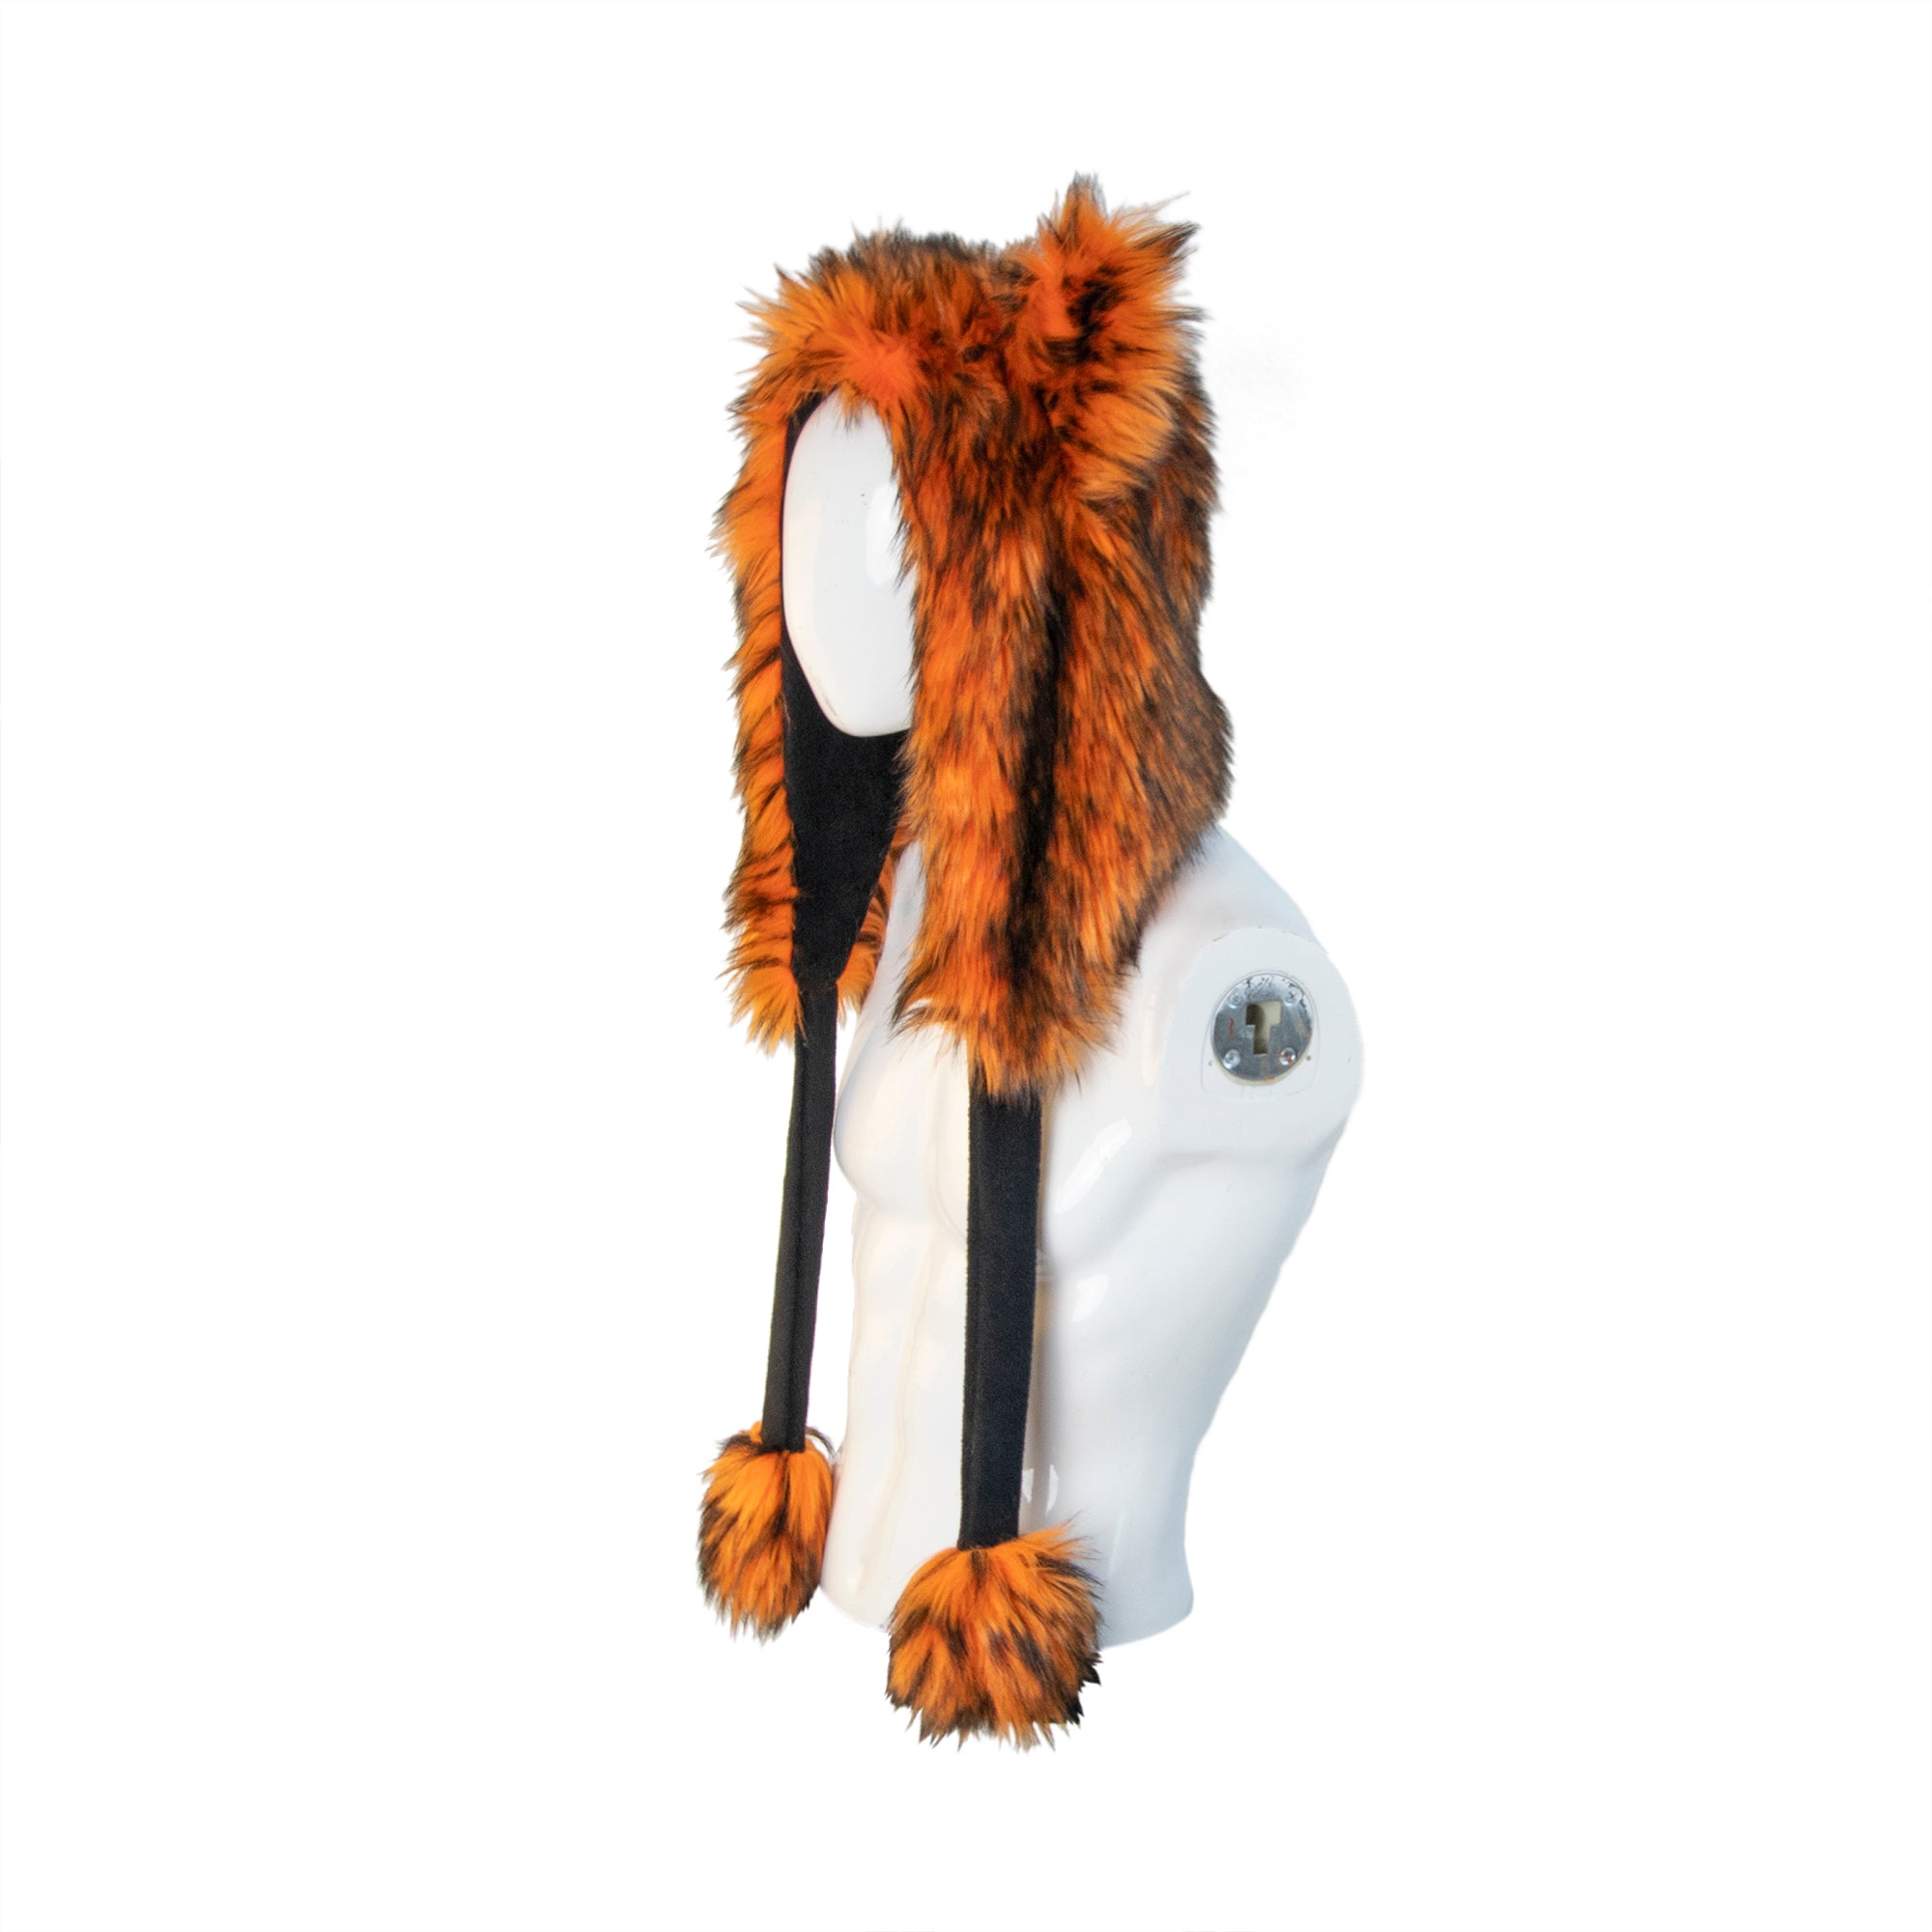 orange Wild Wolf Fur Puffet Hood. Furry cosplay festival hat made from faux fur. Made in the usa